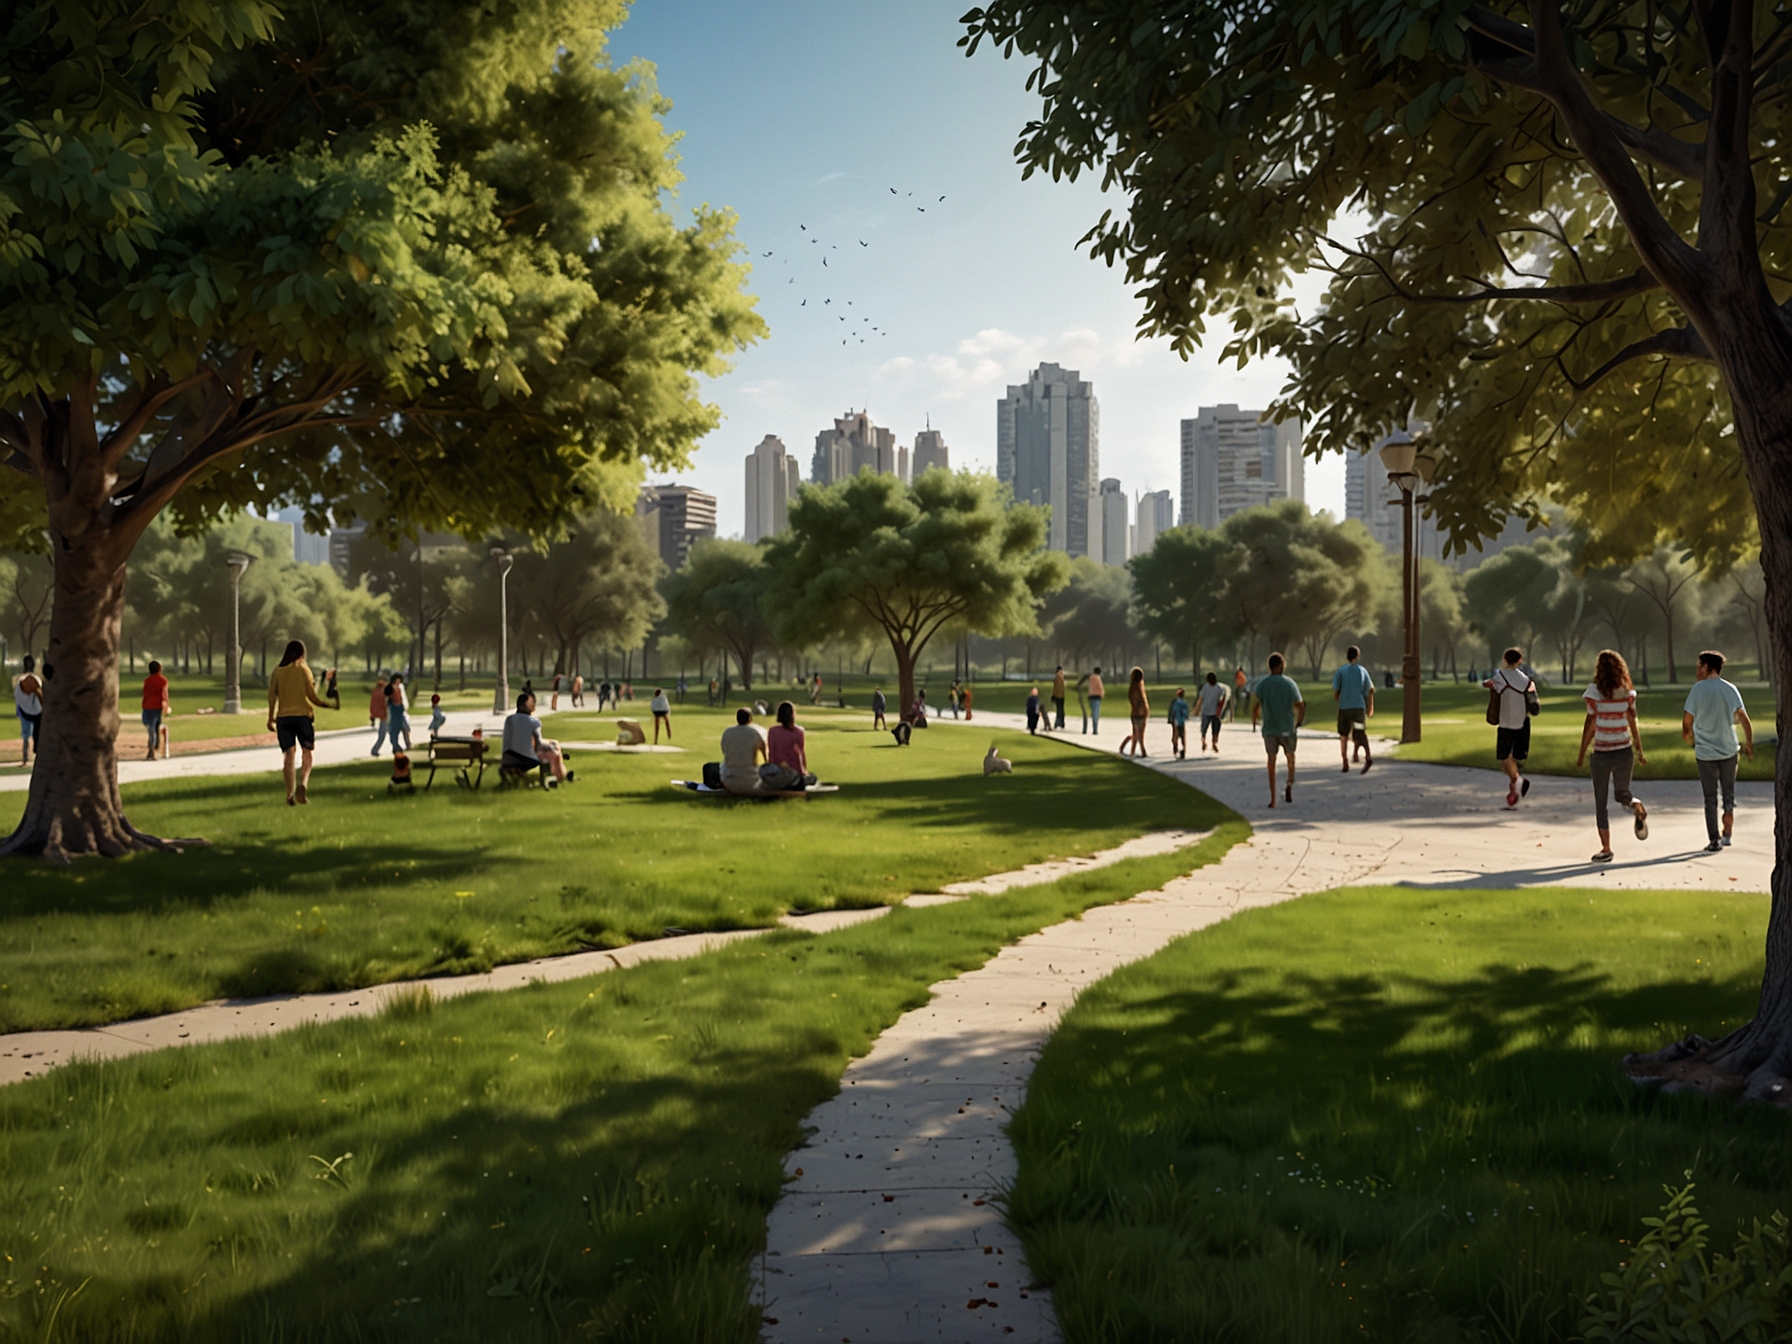 A view of Malha’s green spaces with families enjoying the parks, highlighting the neighborhood’s commitment to a high quality of life and its integration of natural beauty within urban development.